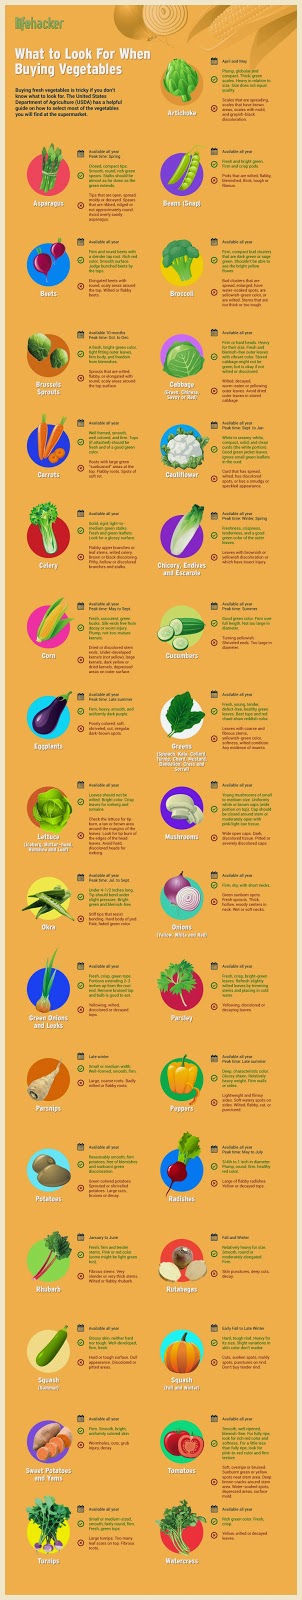 What to Look for When Buying Vegetables